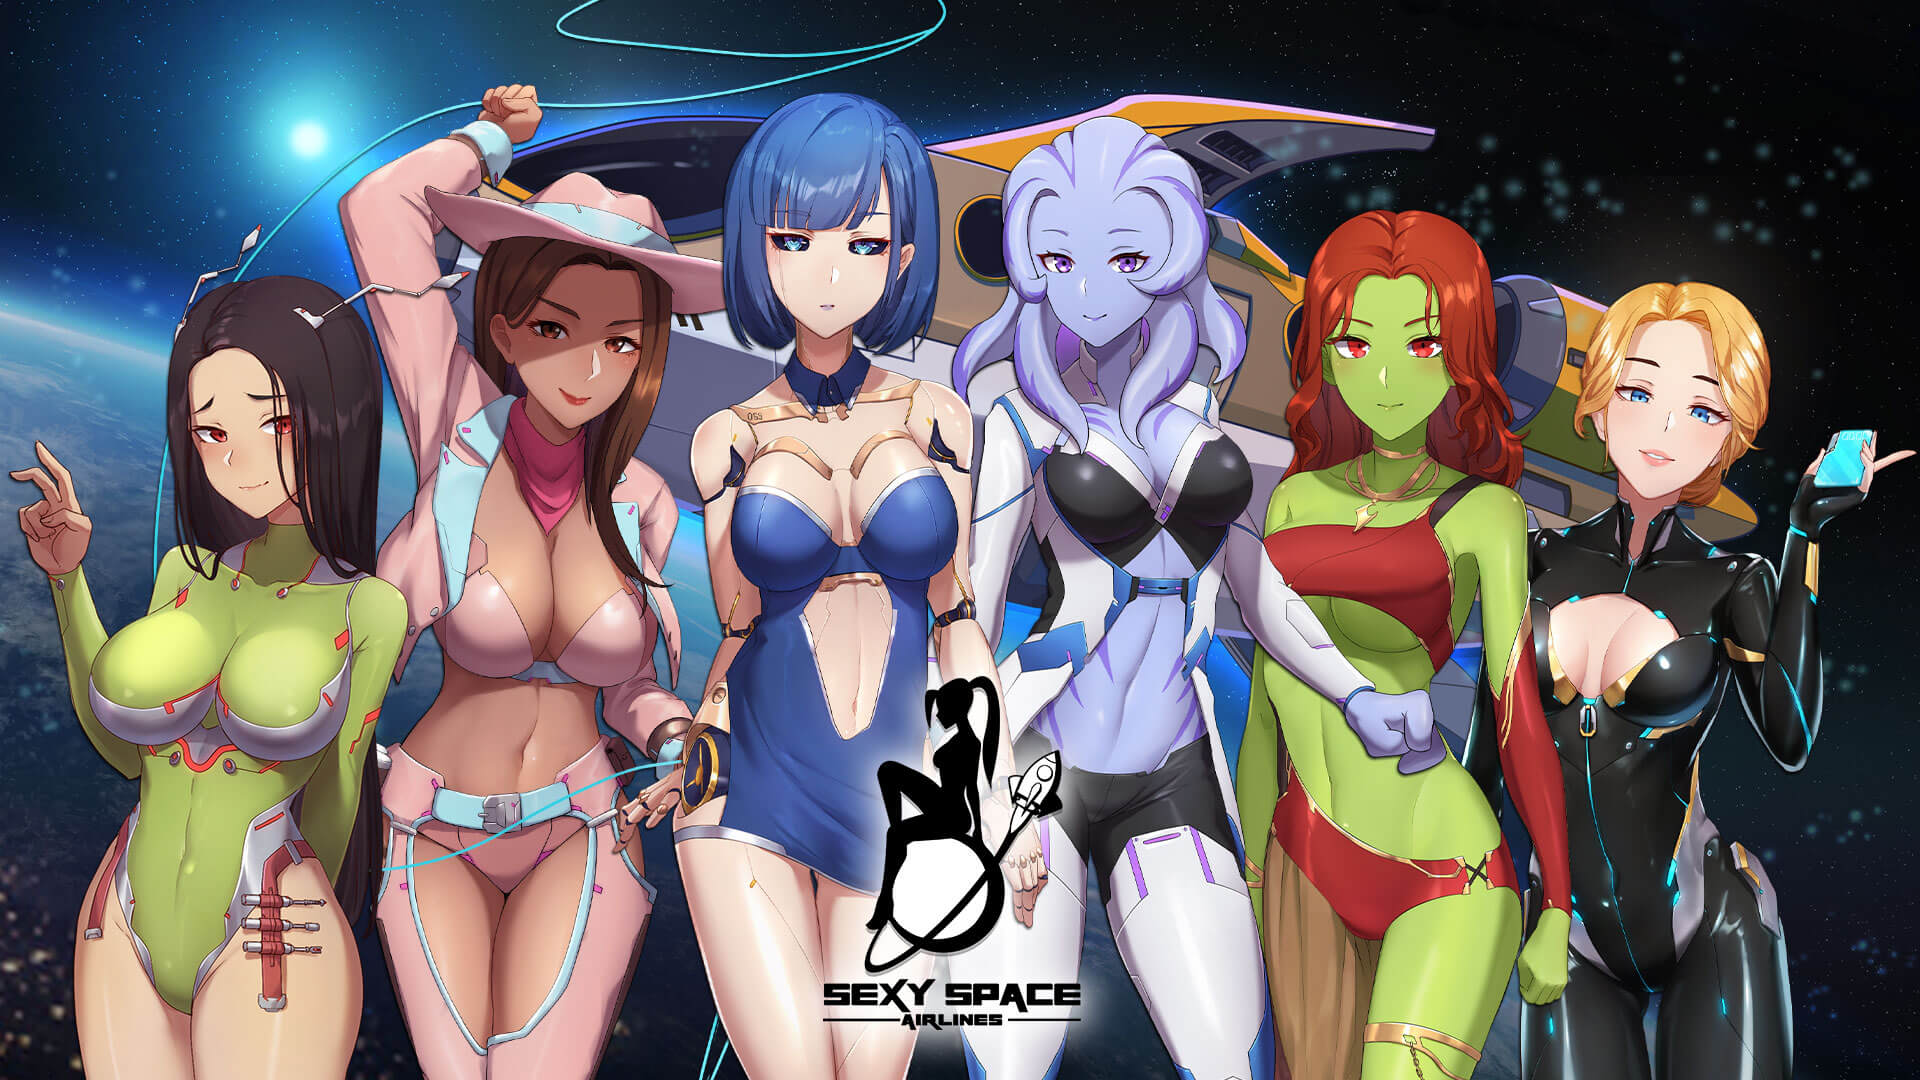 Sexy Anime Space Girl - Sexy Space Airlines - Idle Sex Game with APK file | Nutaku